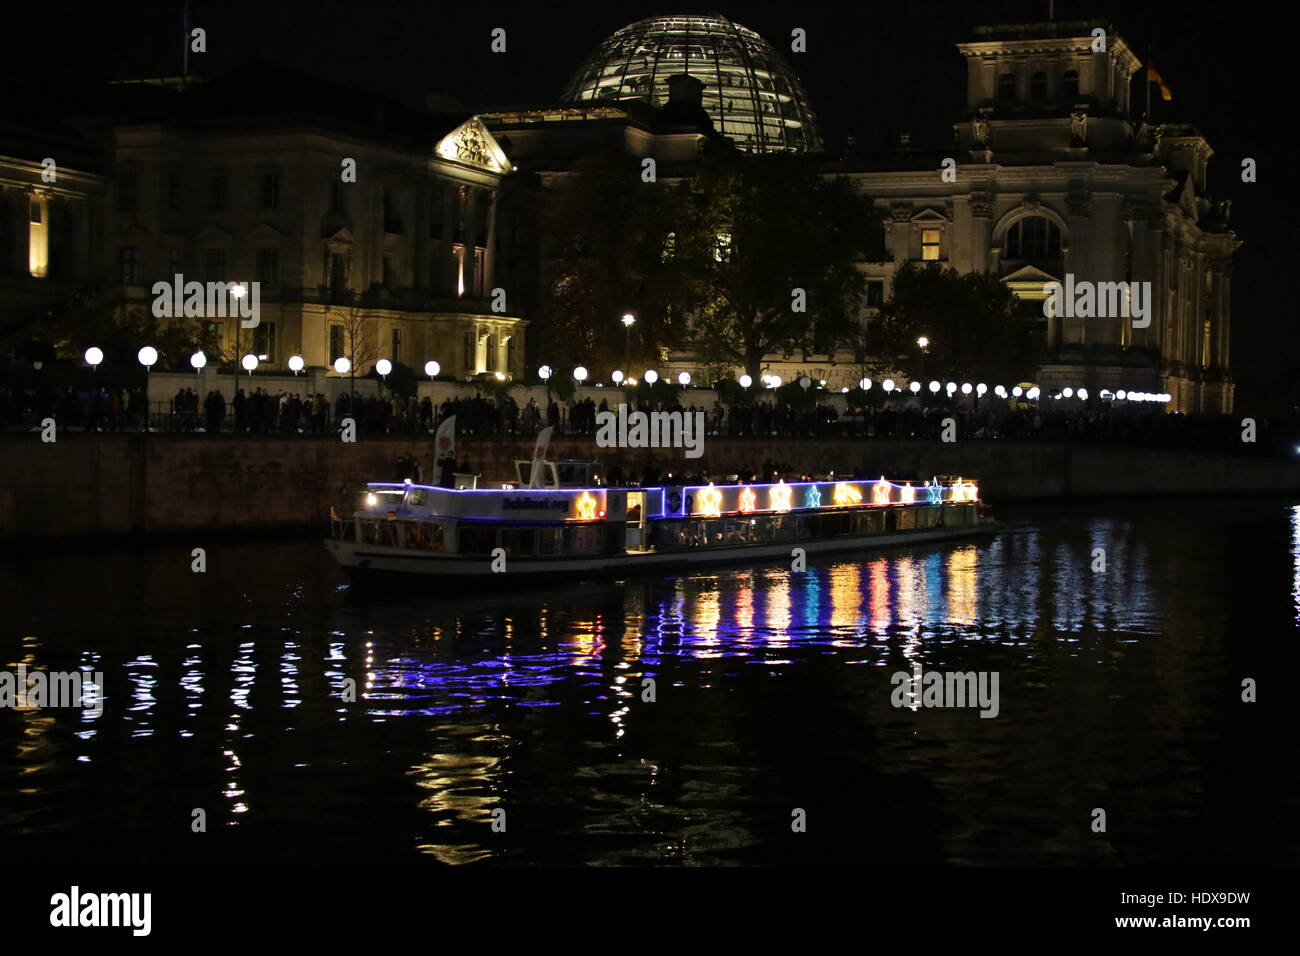 Berlin, Germany, November 8th, 2014: 25th celebrations of the Fall of the Berlin Wall held with a light balloon chain. Stock Photo